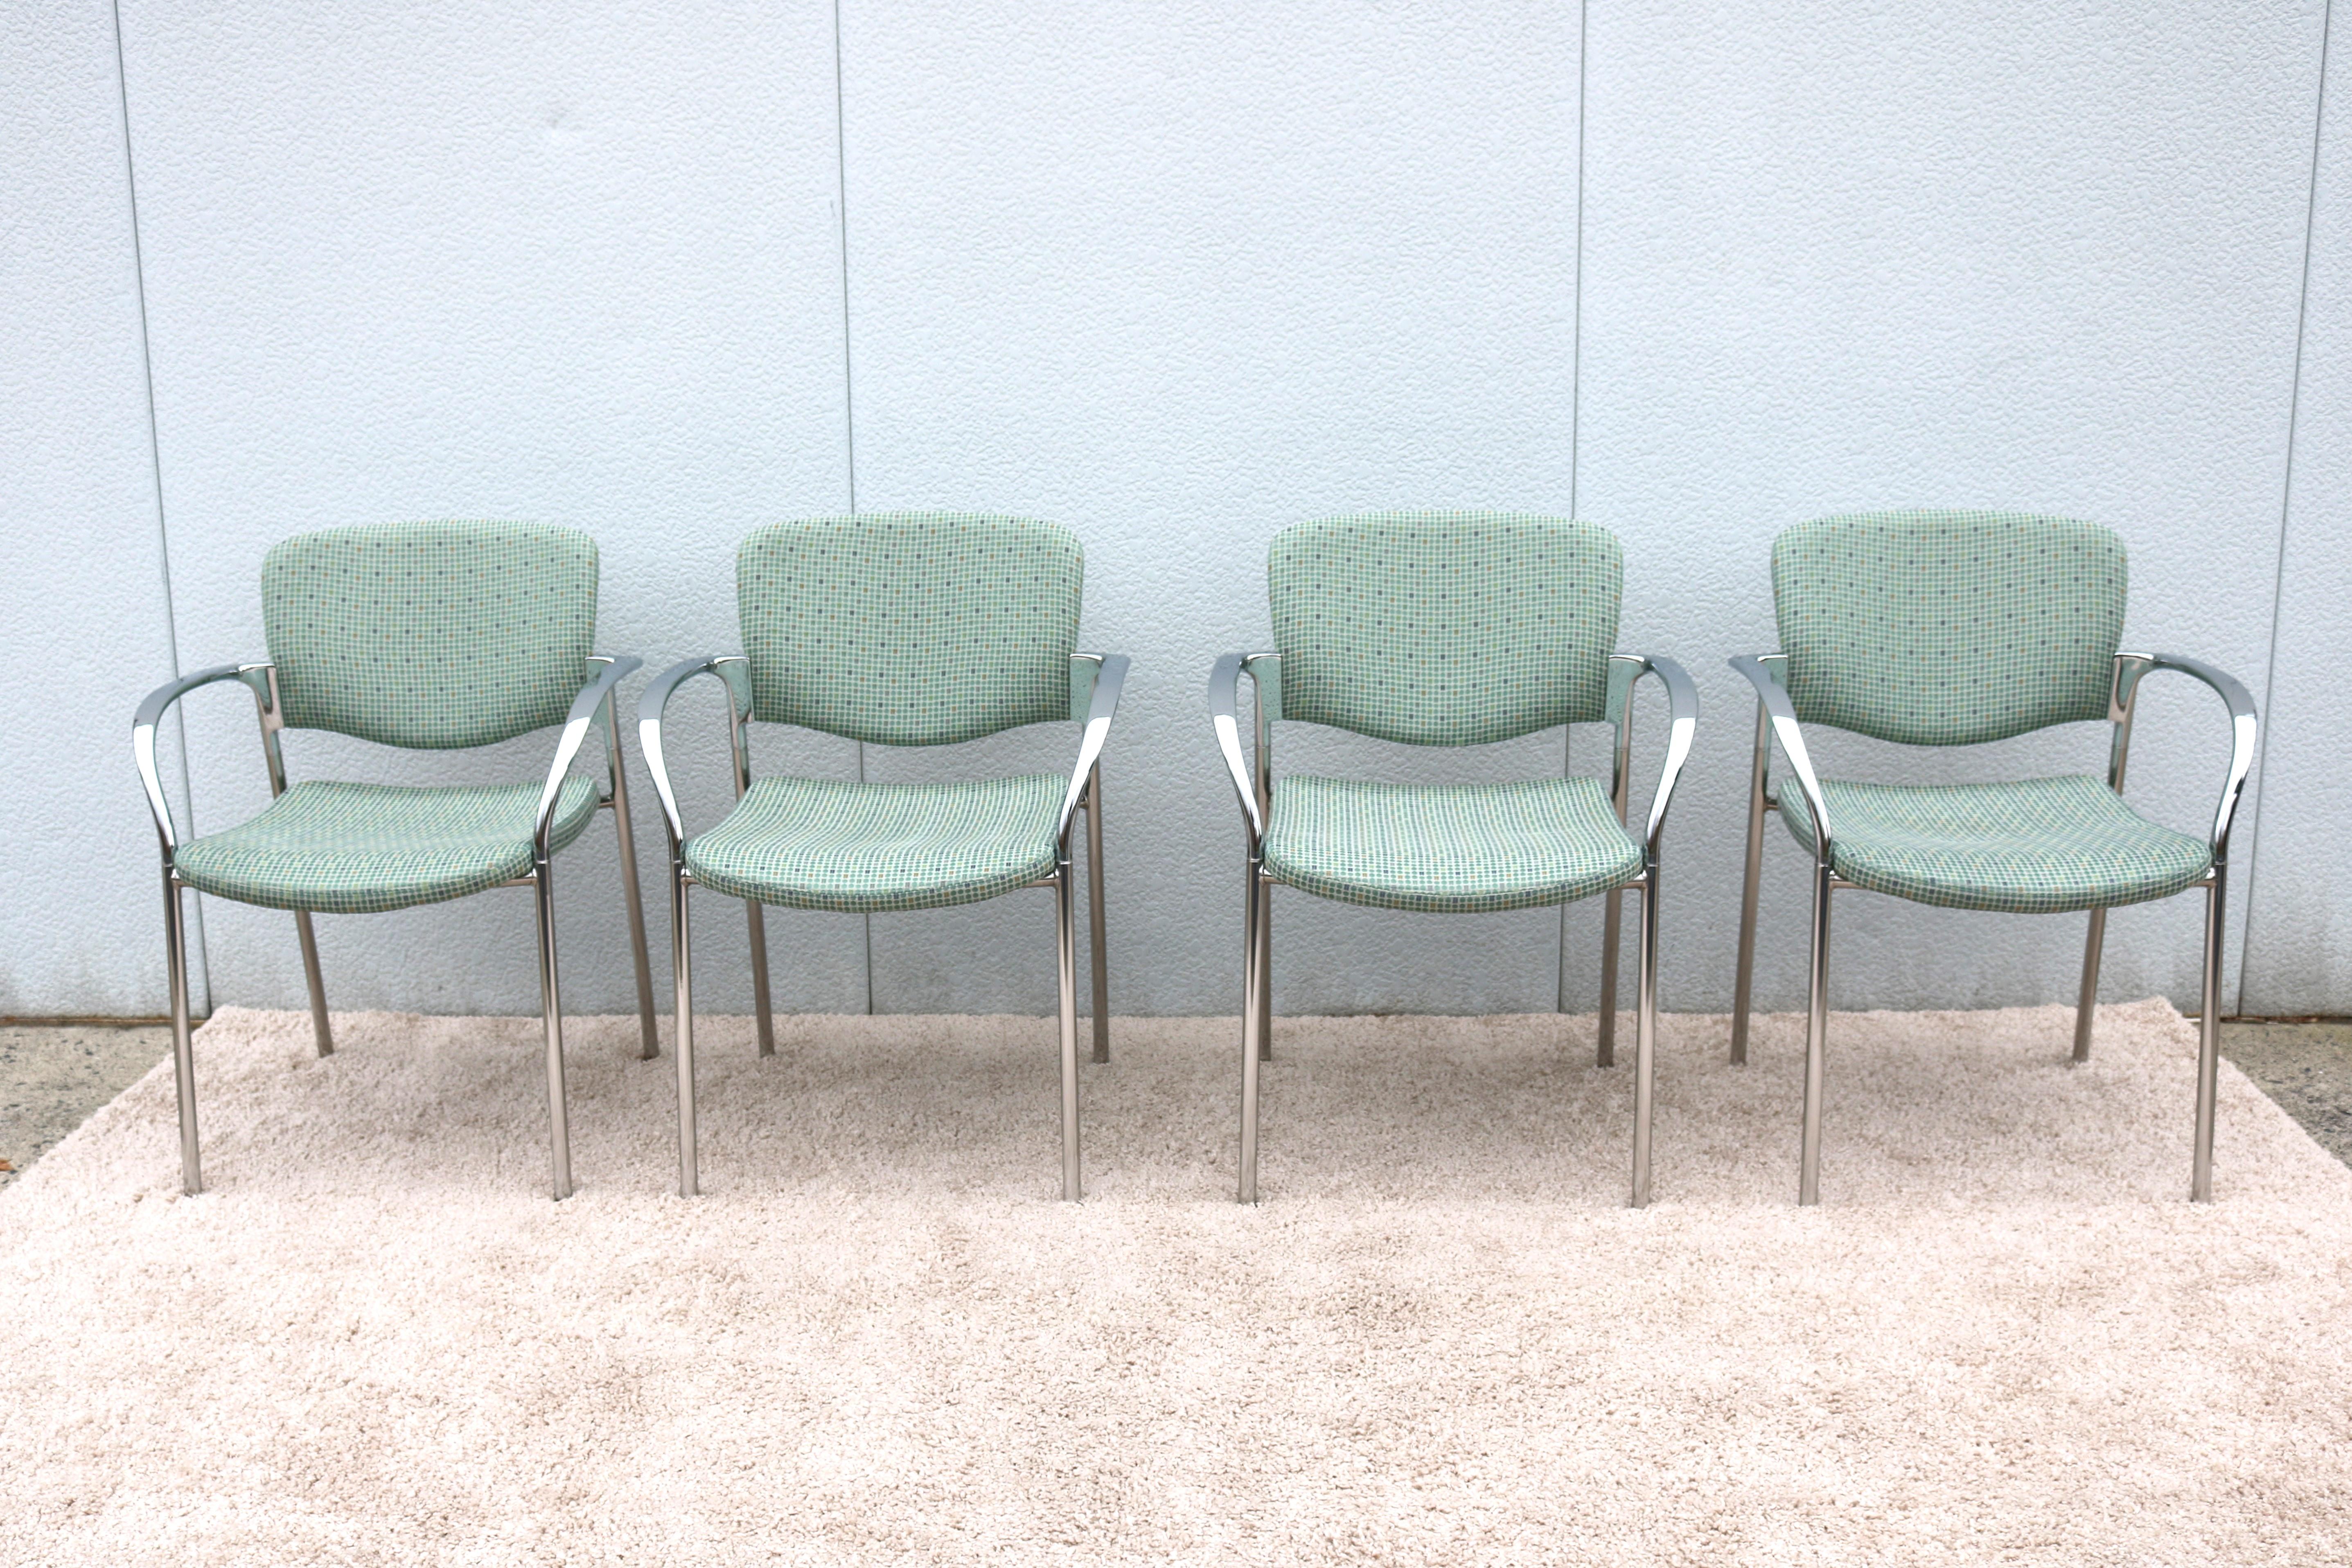 Modern Stylex Welcome Multi Use Green Stacking Guest or Dining Chairs, Set of 4 1